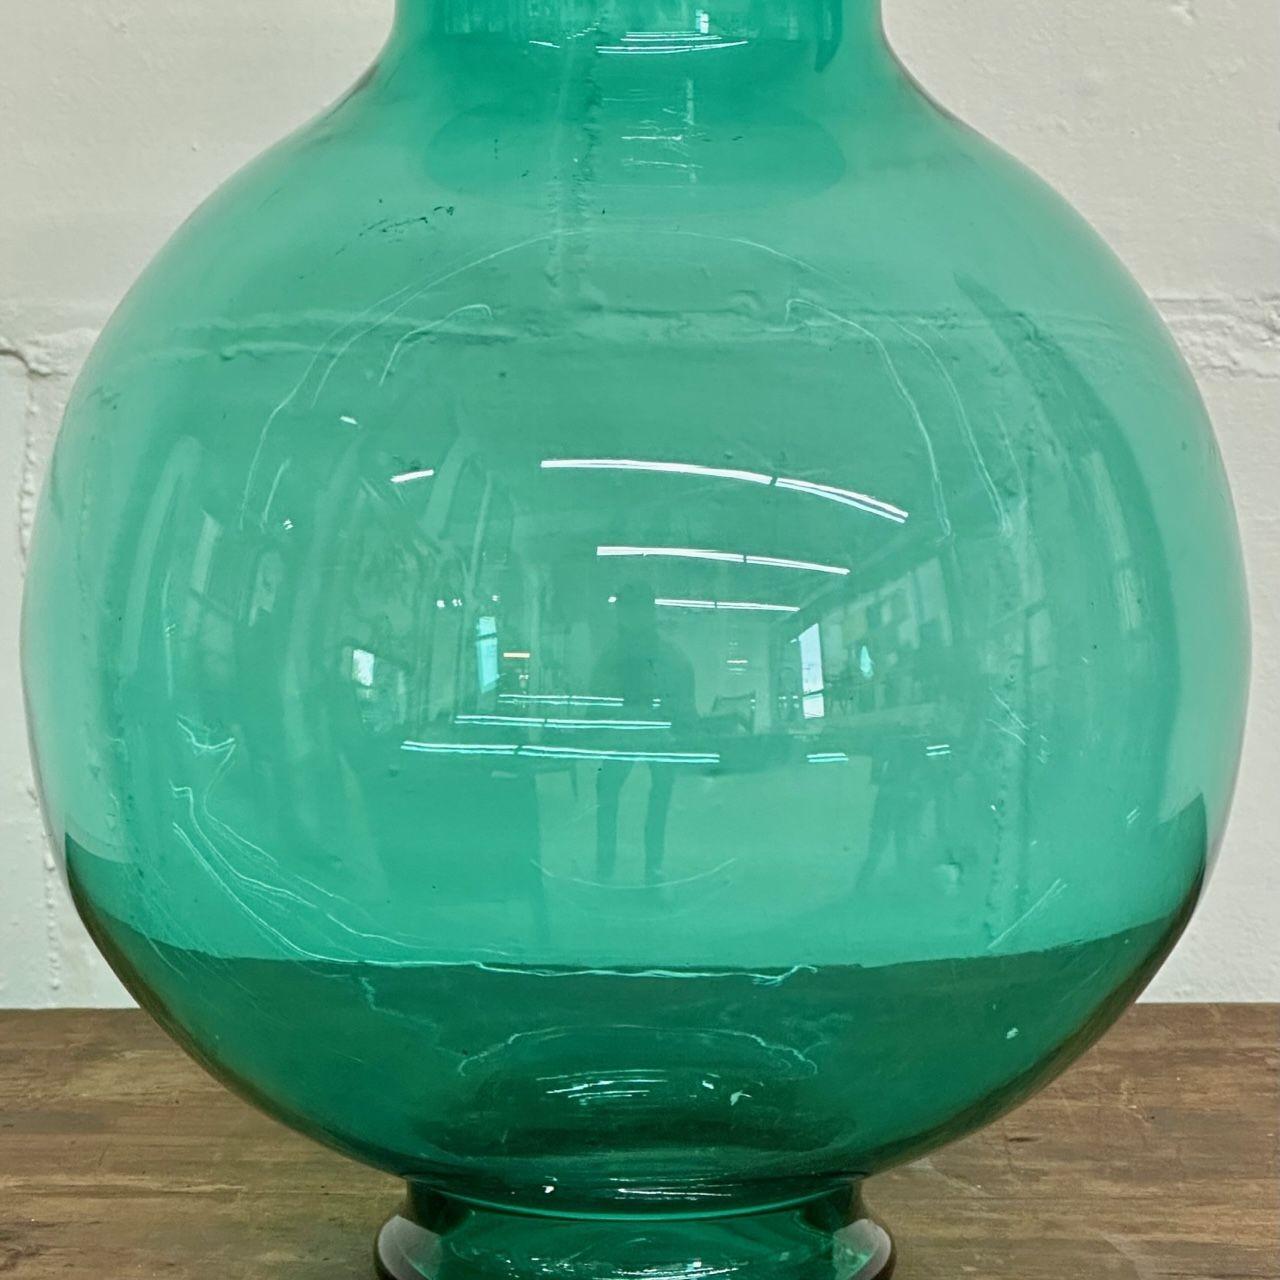 Large Mid-Century Modern Handblown Glass Turquoise Table Vase / Vessel by Blenko For Sale 3